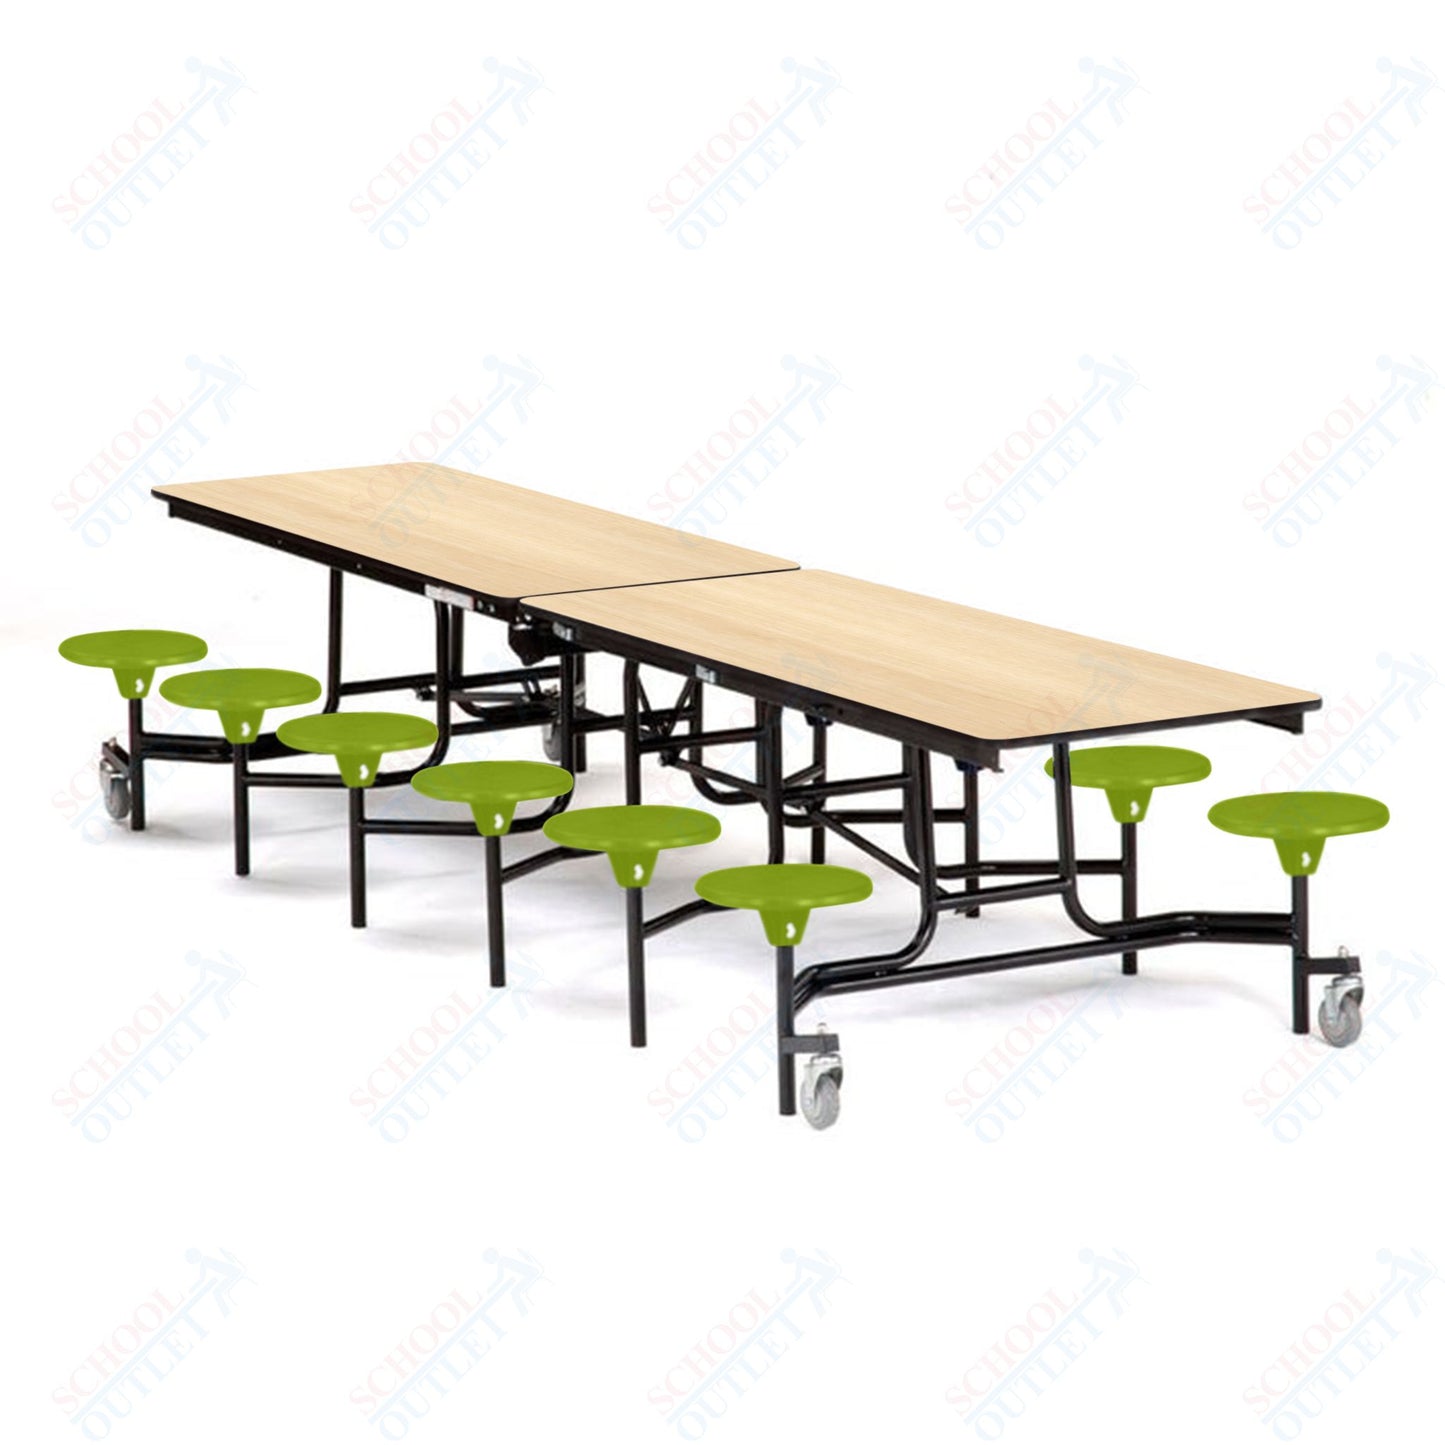 Mobile Cafeteria Lunchroom Stool Table - 30" W x 12' L - 12 Stools - Plywood Core - Protect Edge - Black Powdercoated Frame